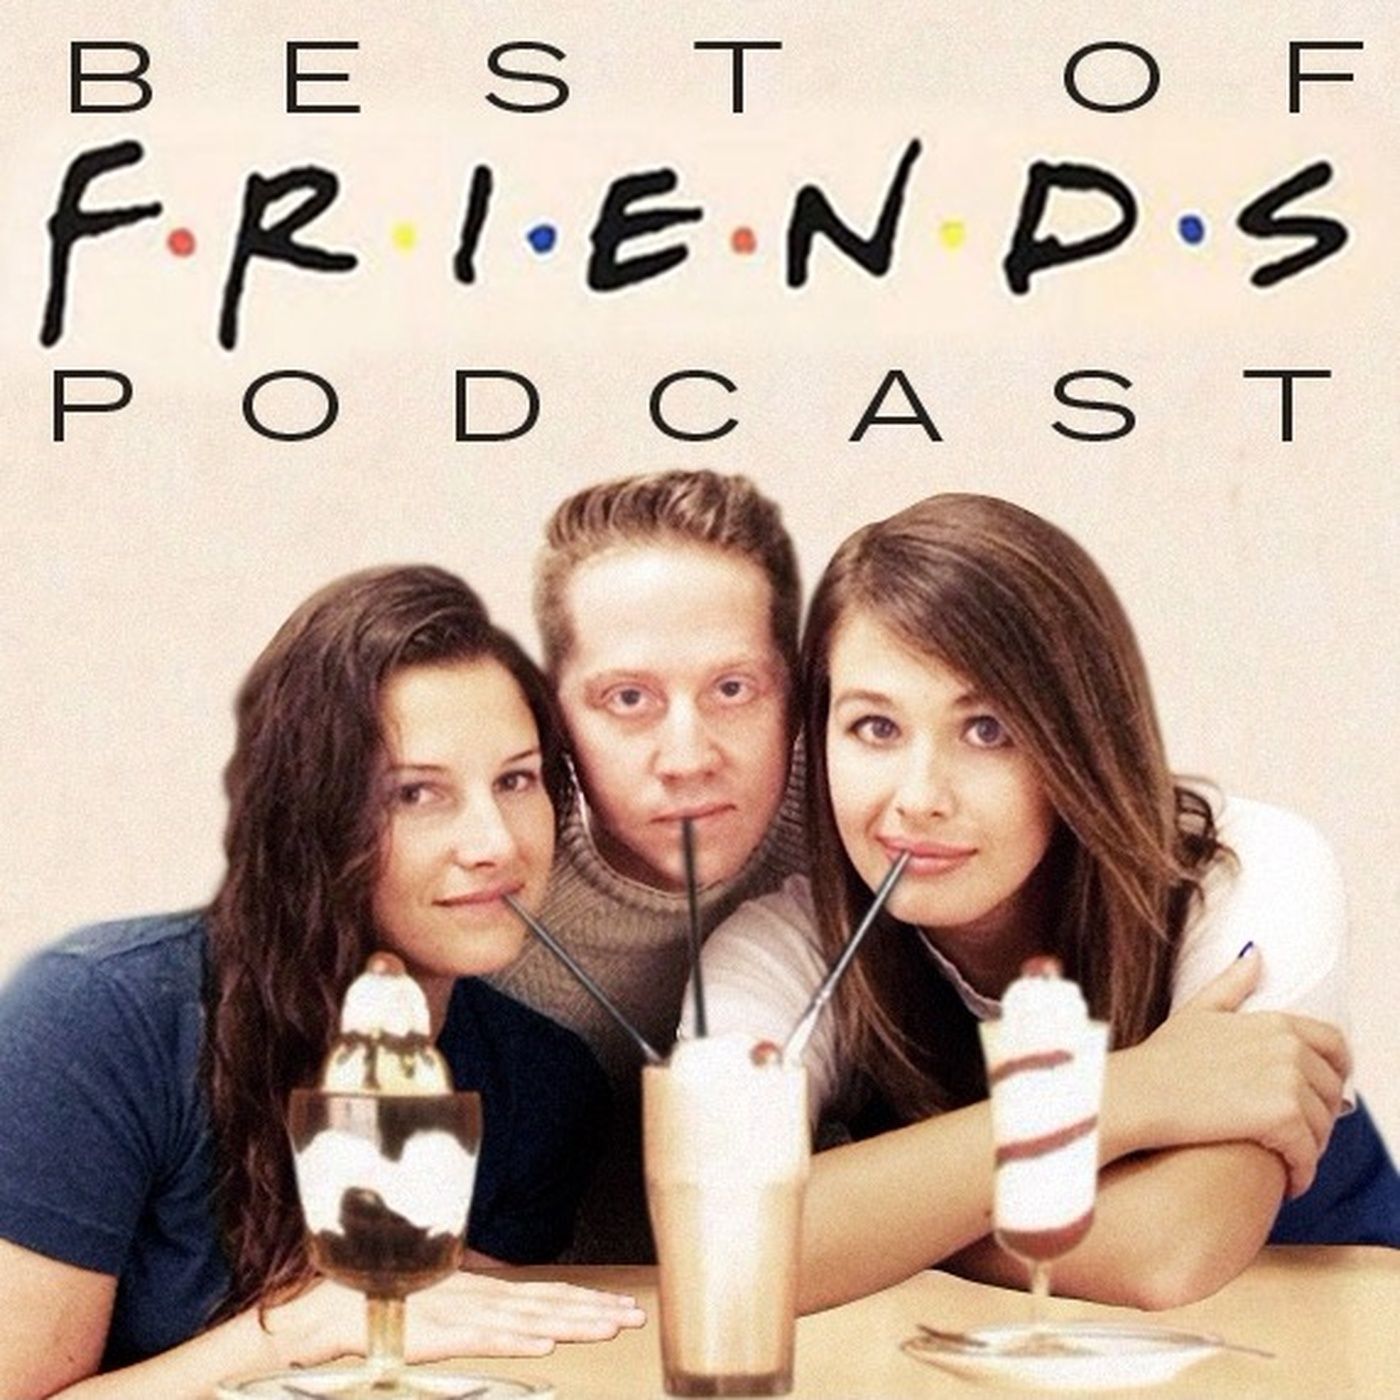 Episode 6: The One Where We’re Drunk